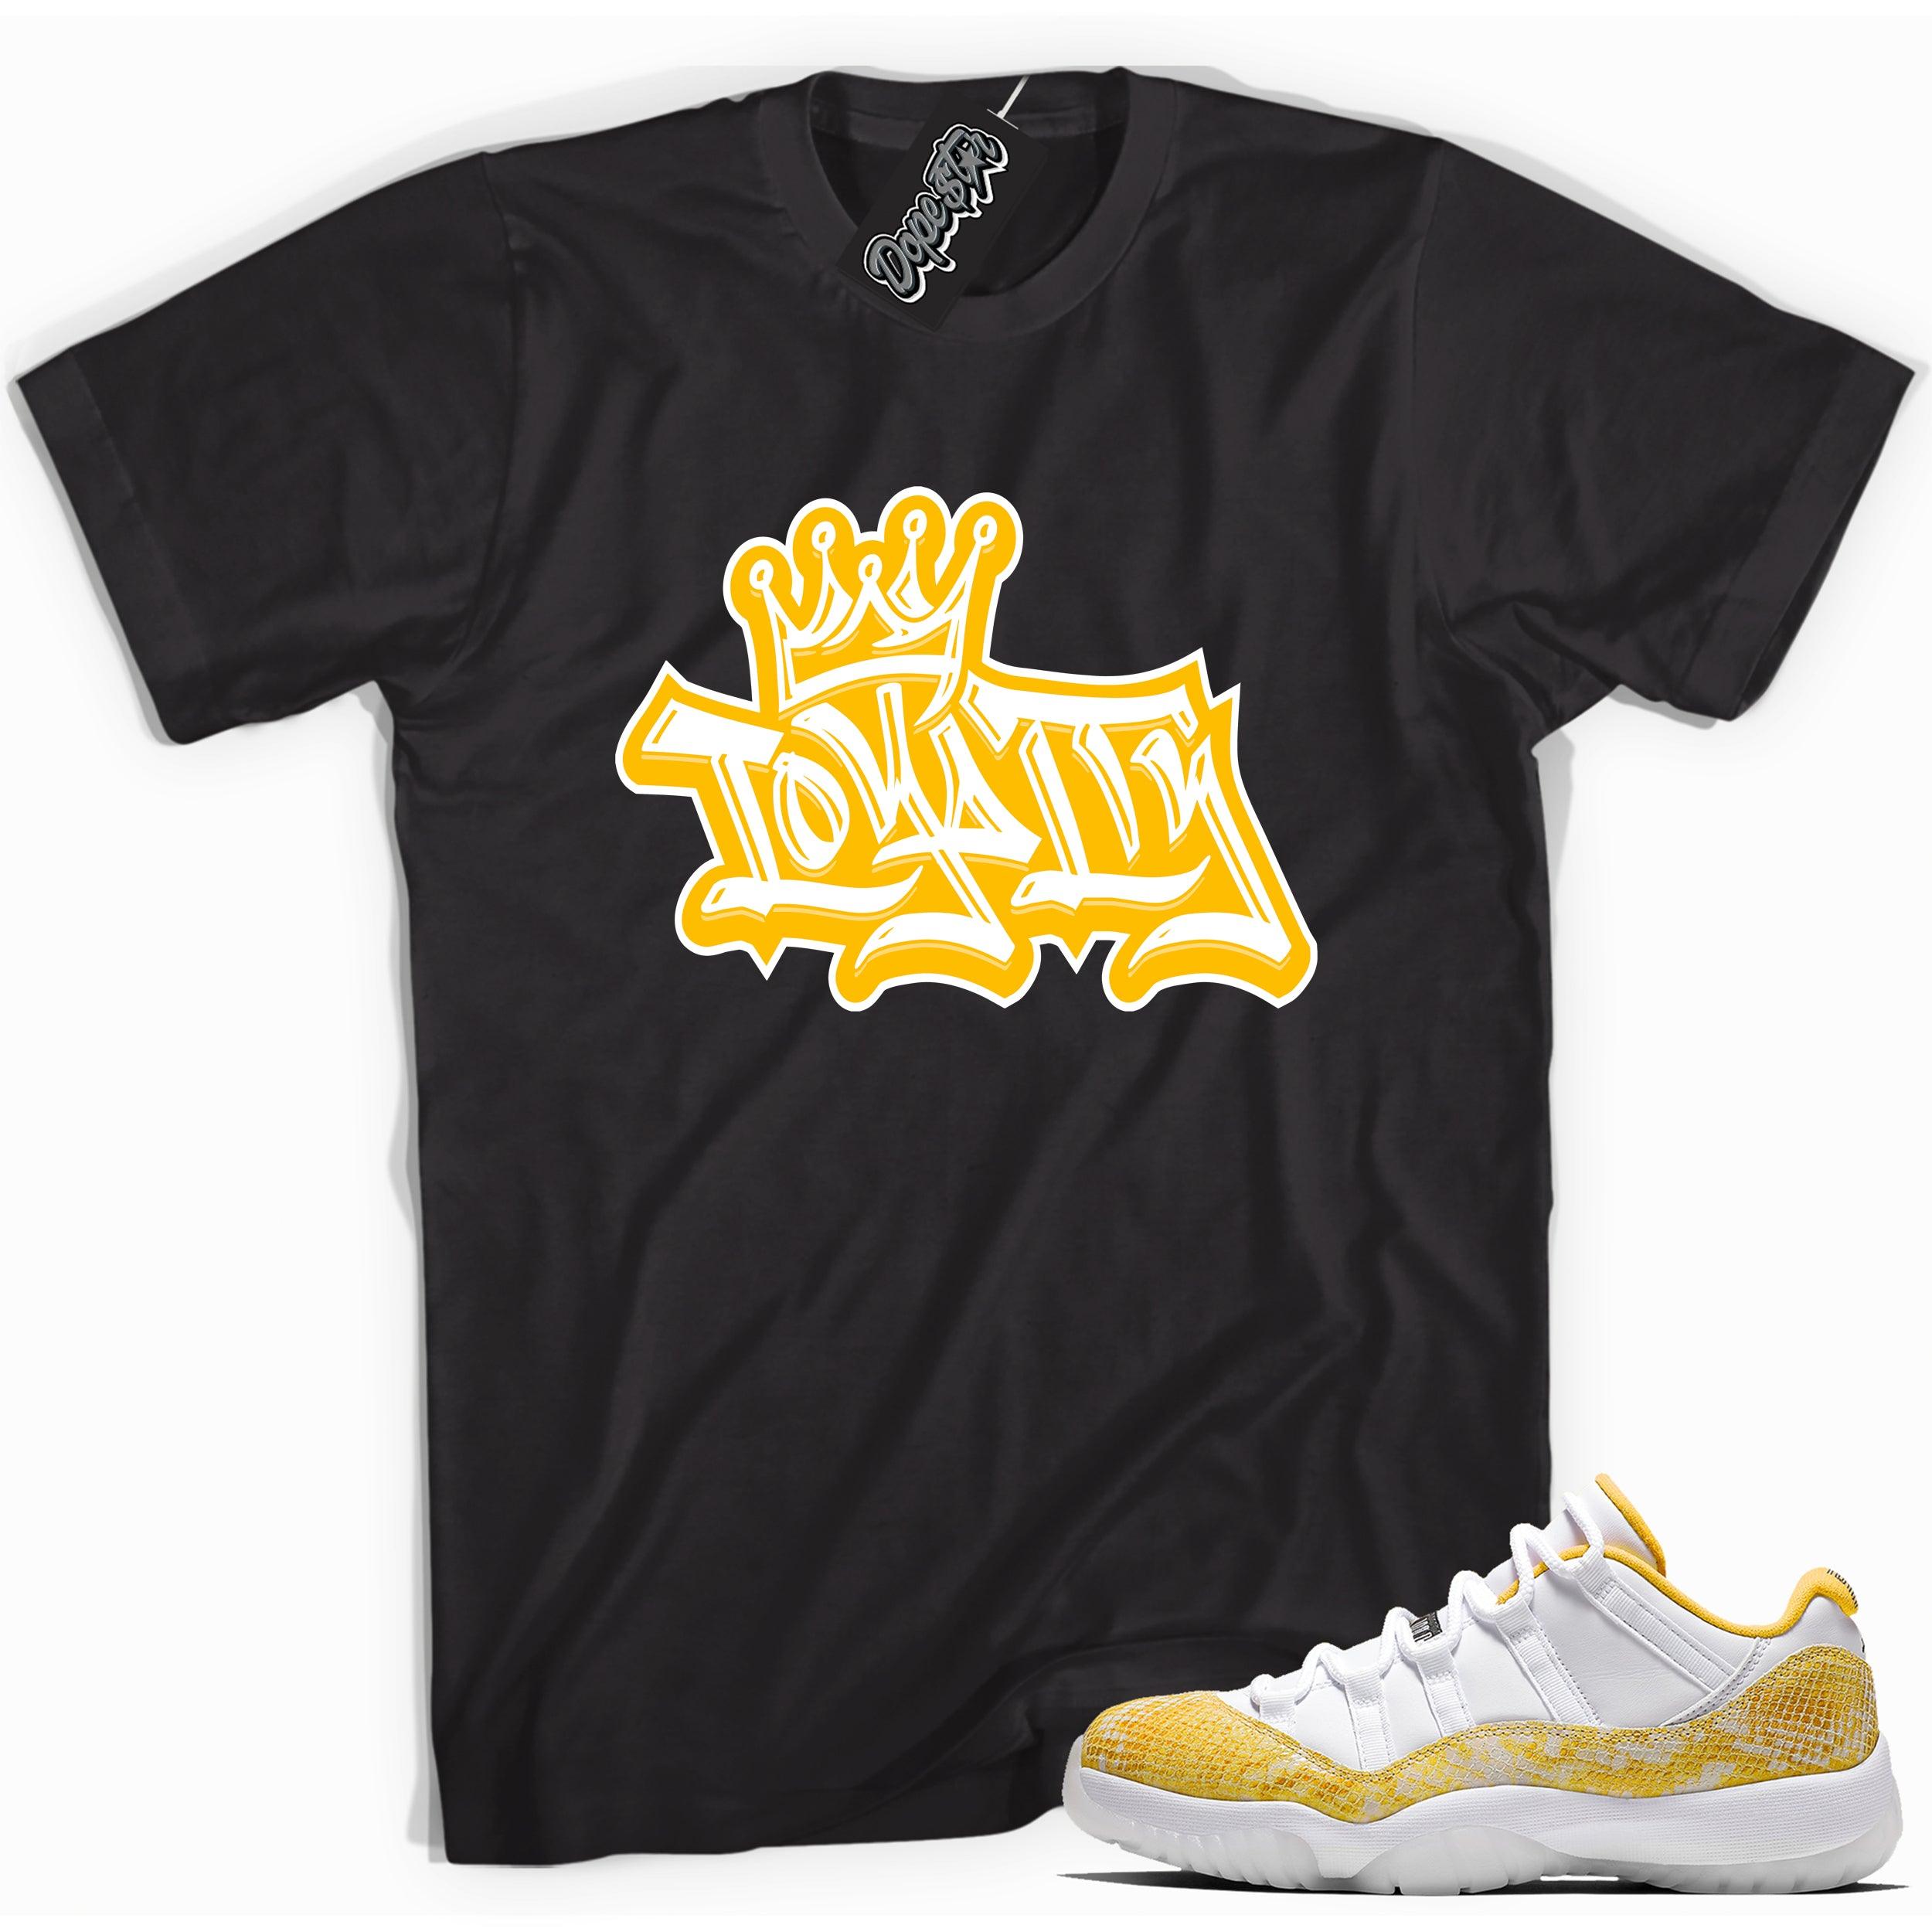 Cool black graphic tee with 'loyalty' print, that perfectly matches  Air Jordan 11 Retro Low Yellow Snakeskin sneakers